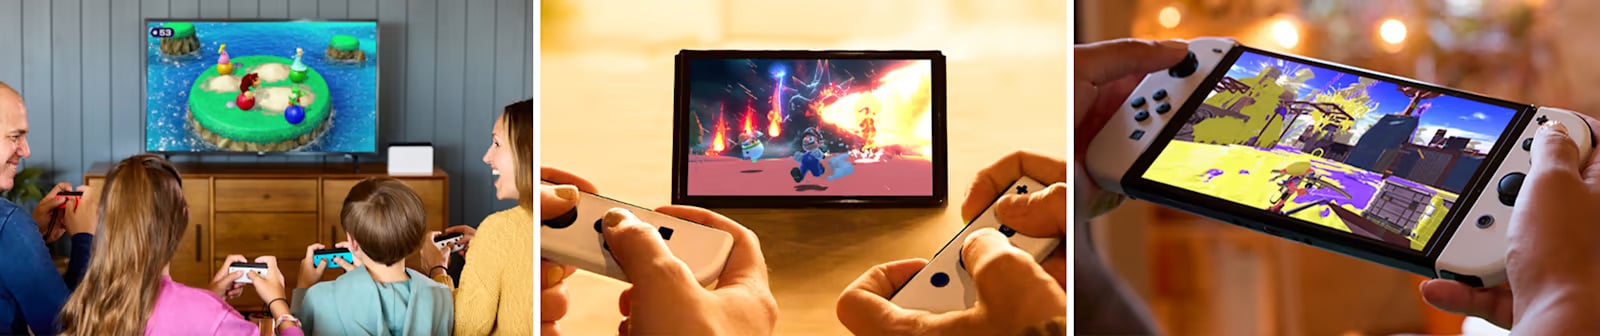 Three ways to play - TV mode, tabletop mode and handheld mode.